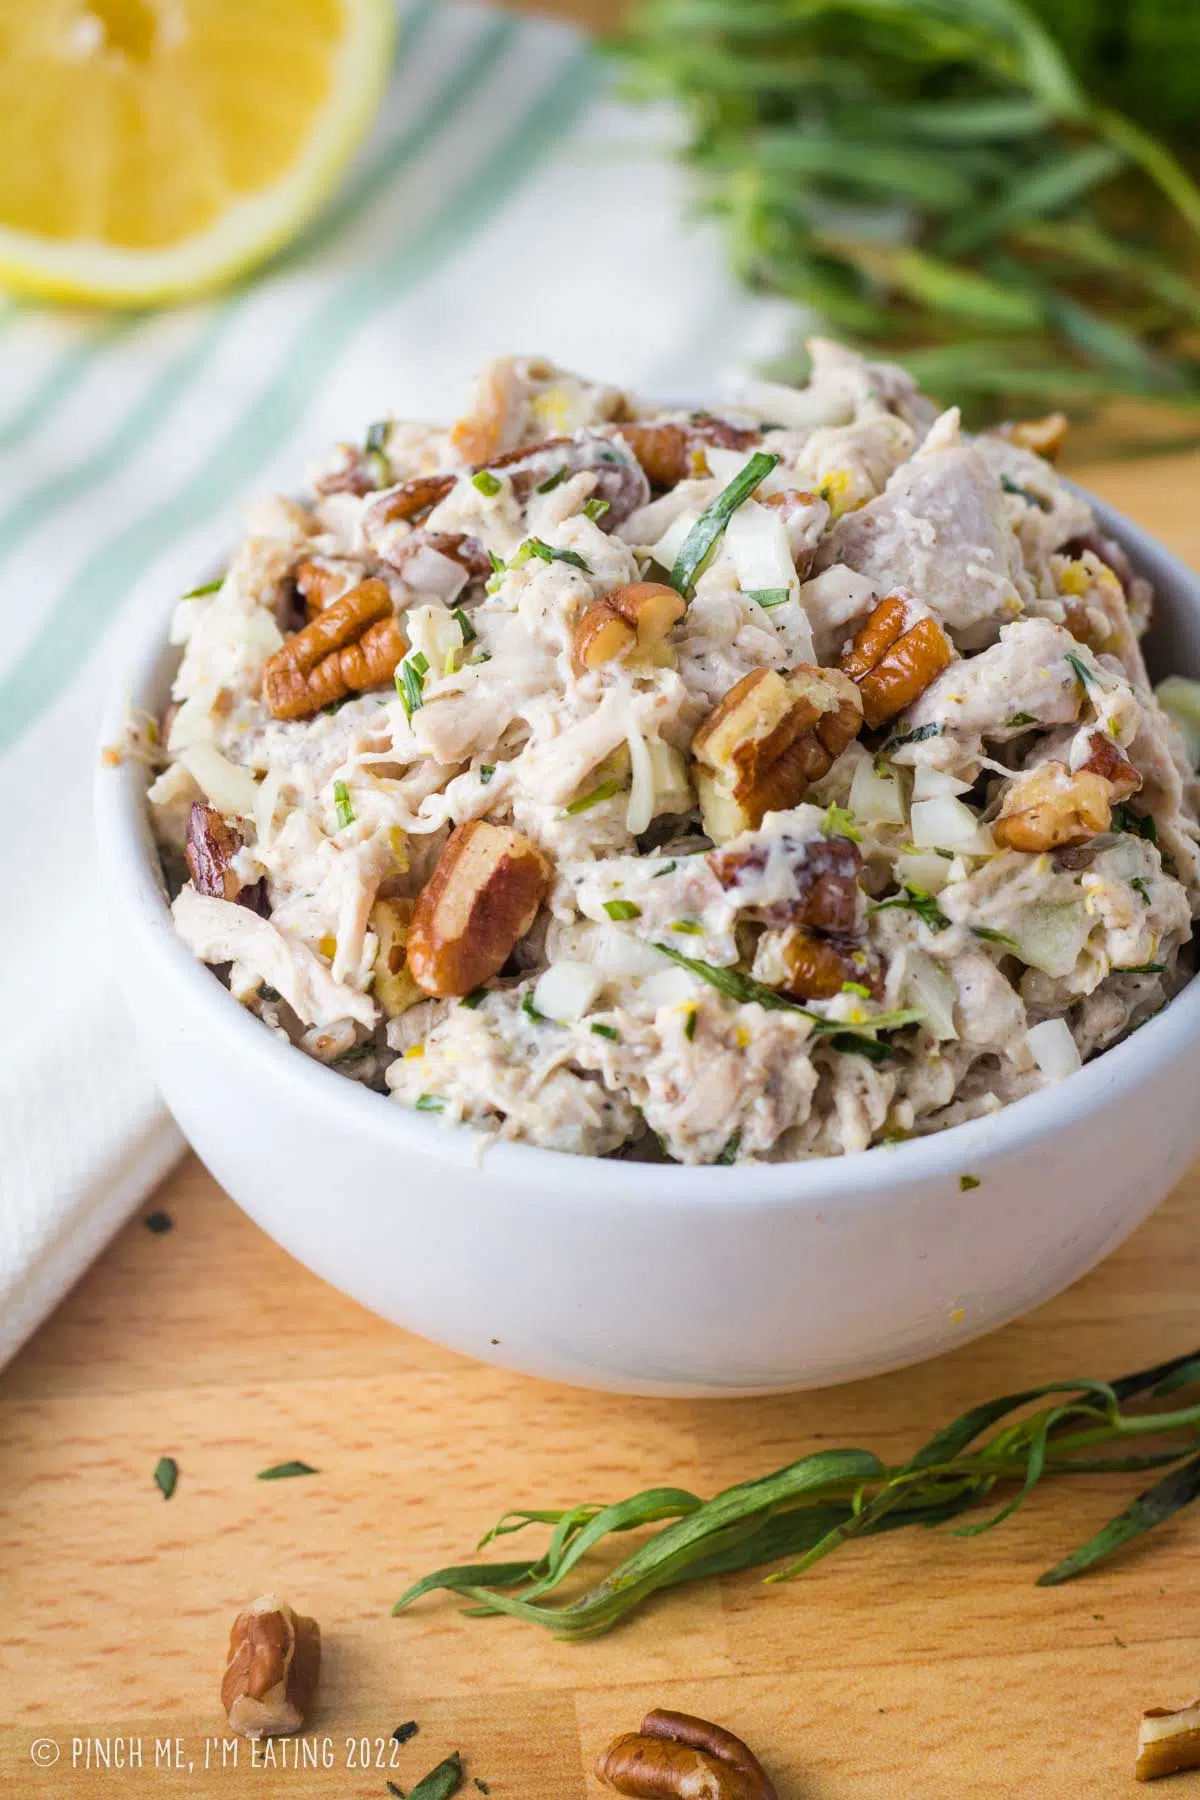 Lemon tarragon shredded chicken salad topped with pecans in a white bowl.